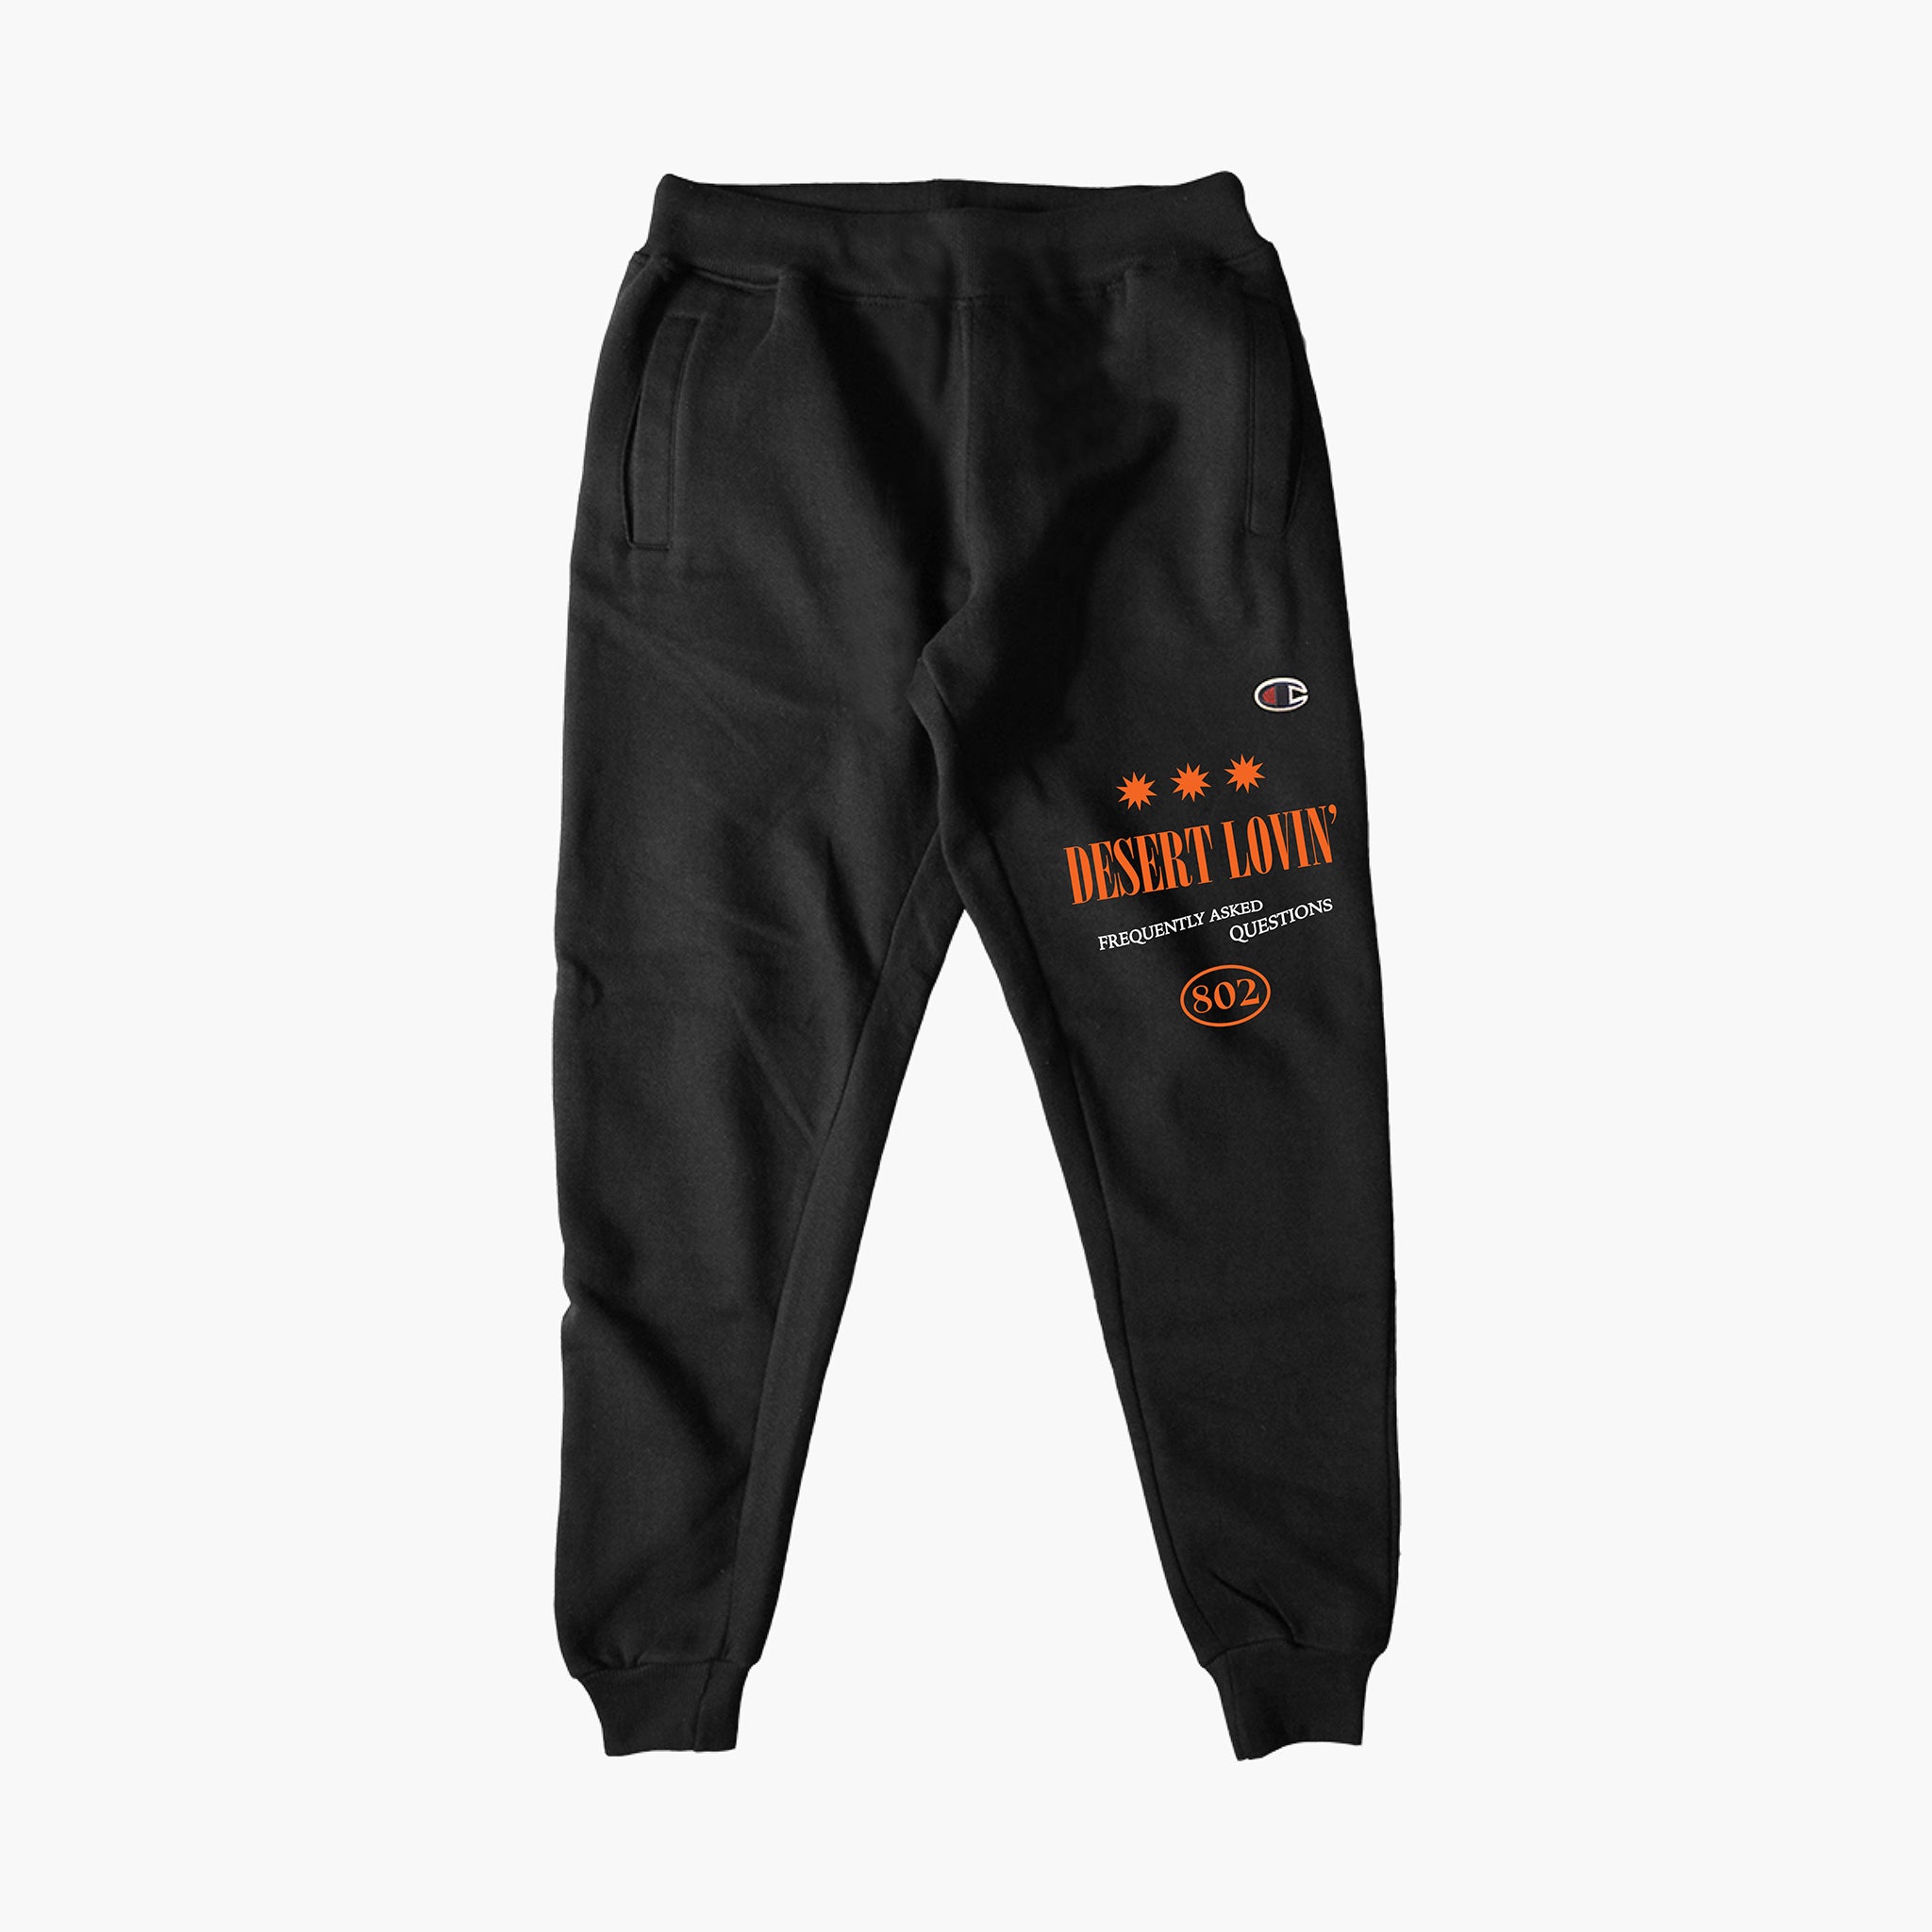 Utopian Livin Joggers - Frequently Asked Questions